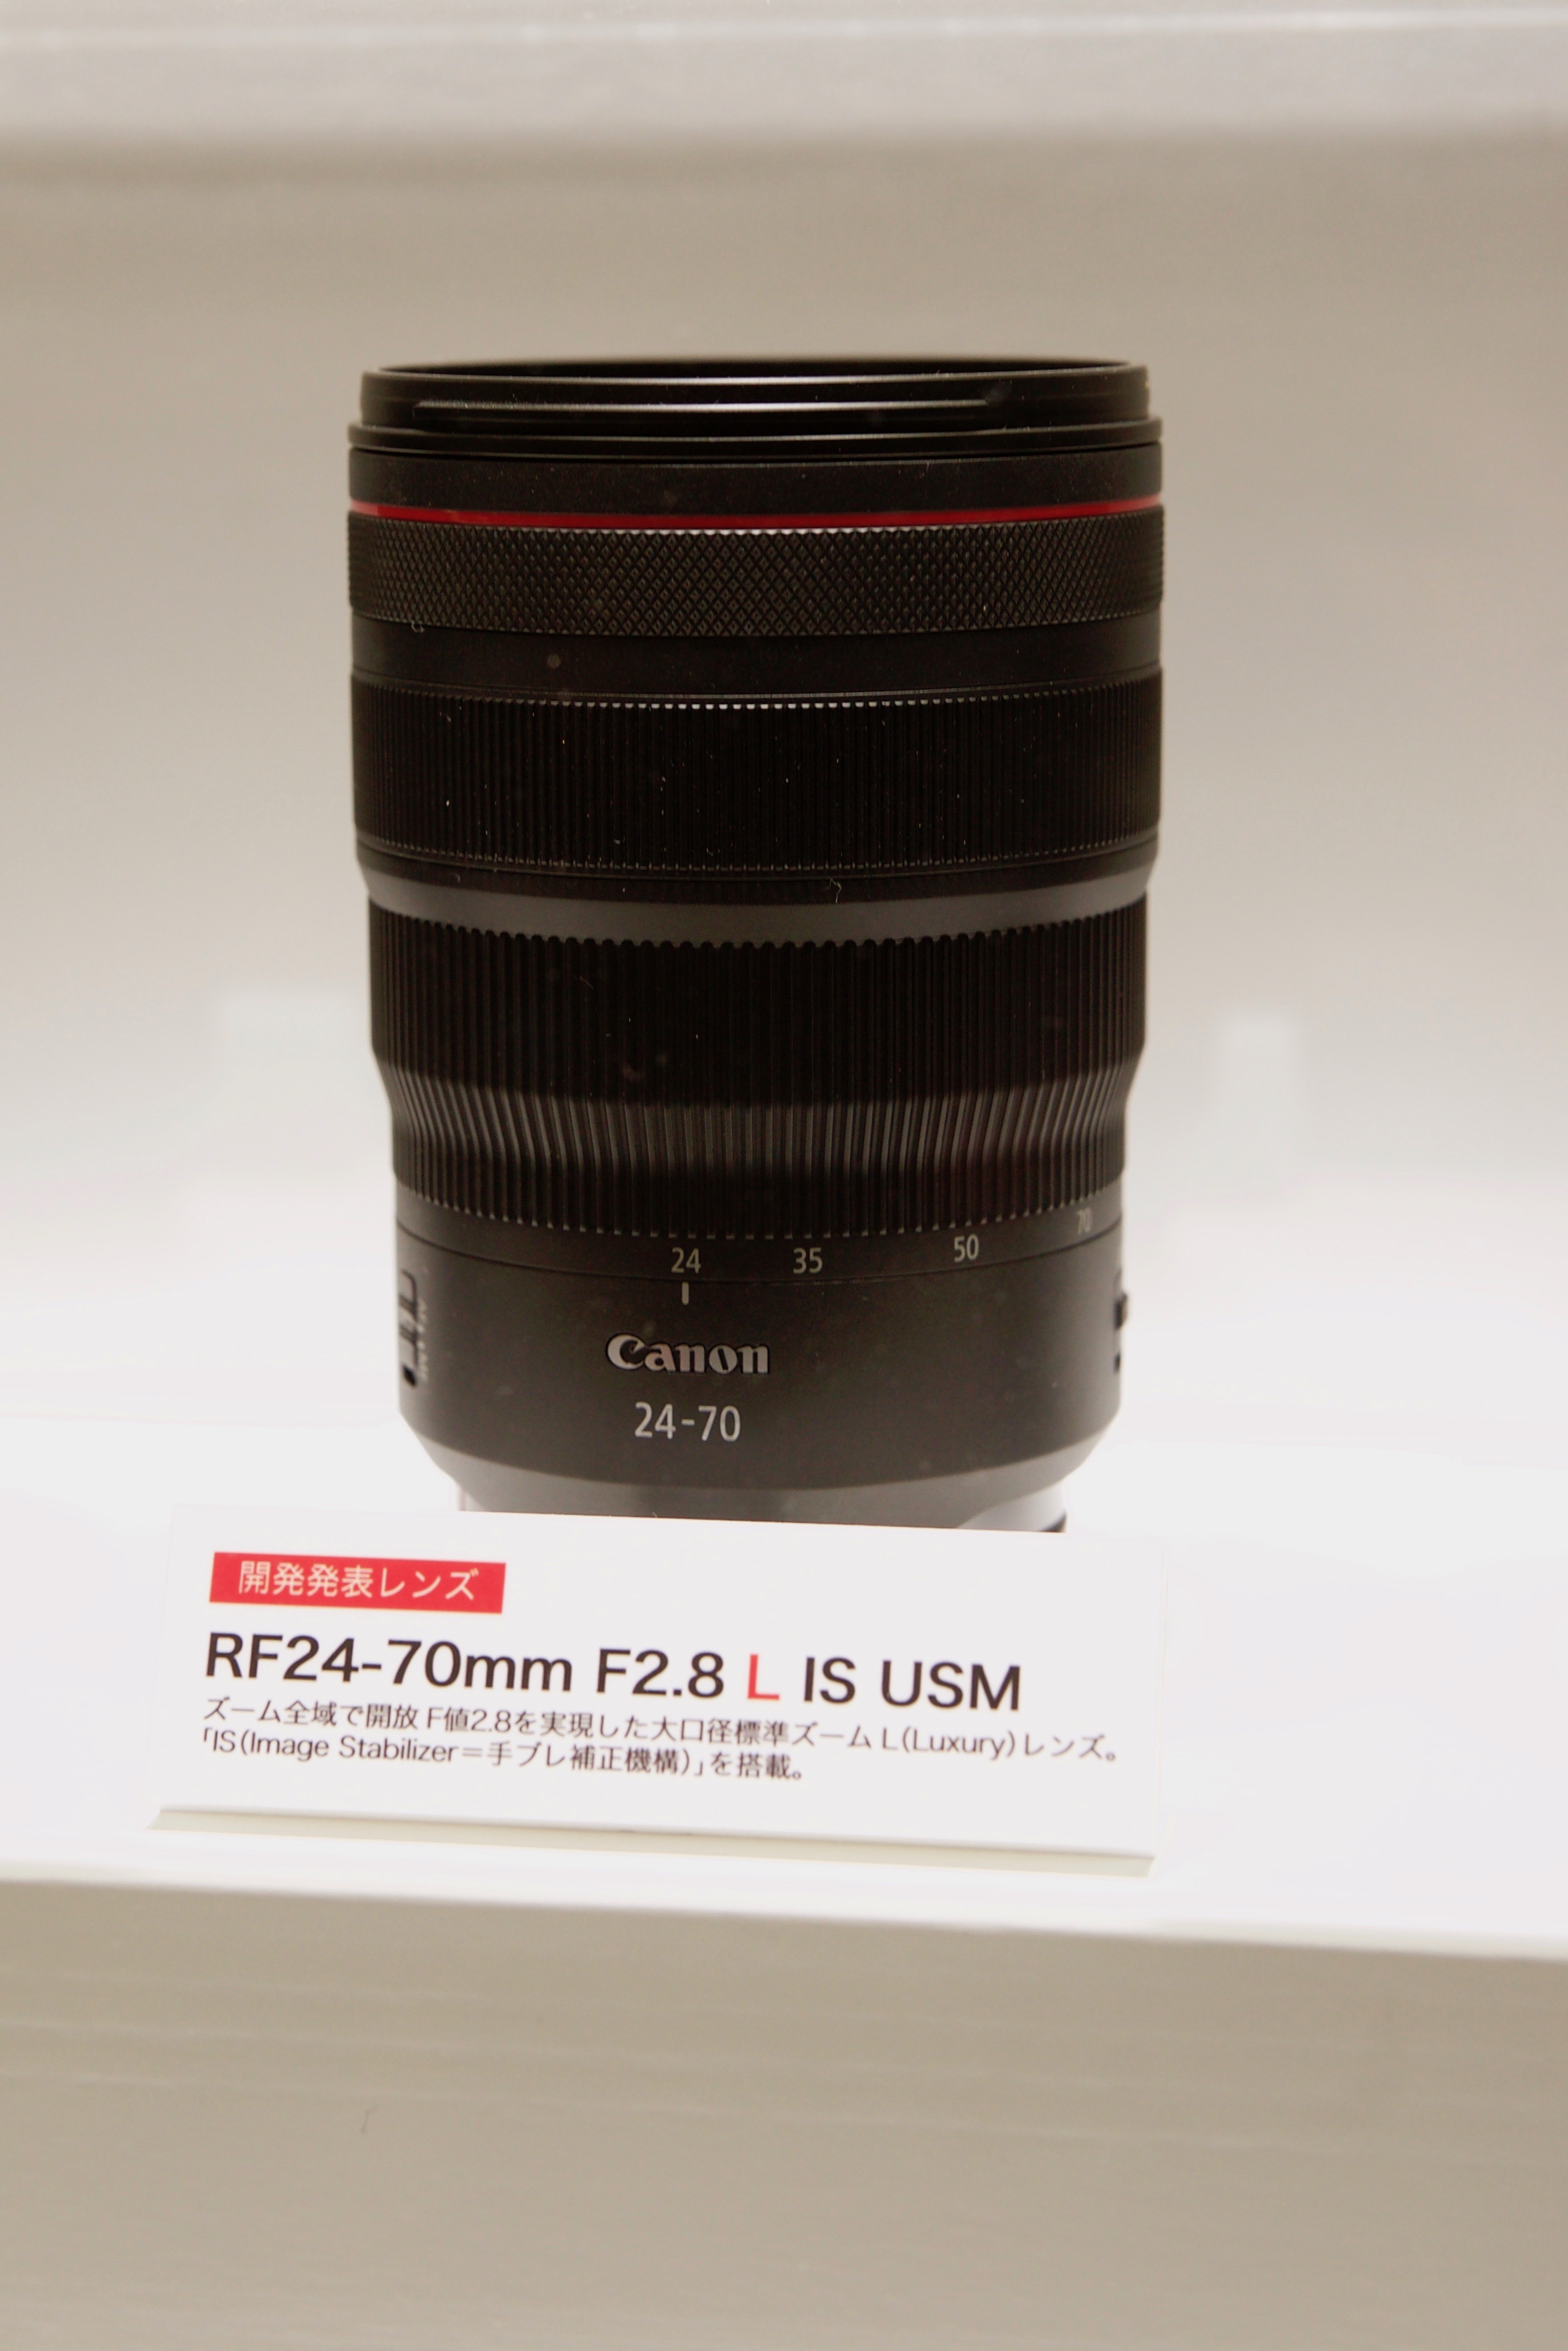 New Canon R mount lenses shown at CP+ 2019